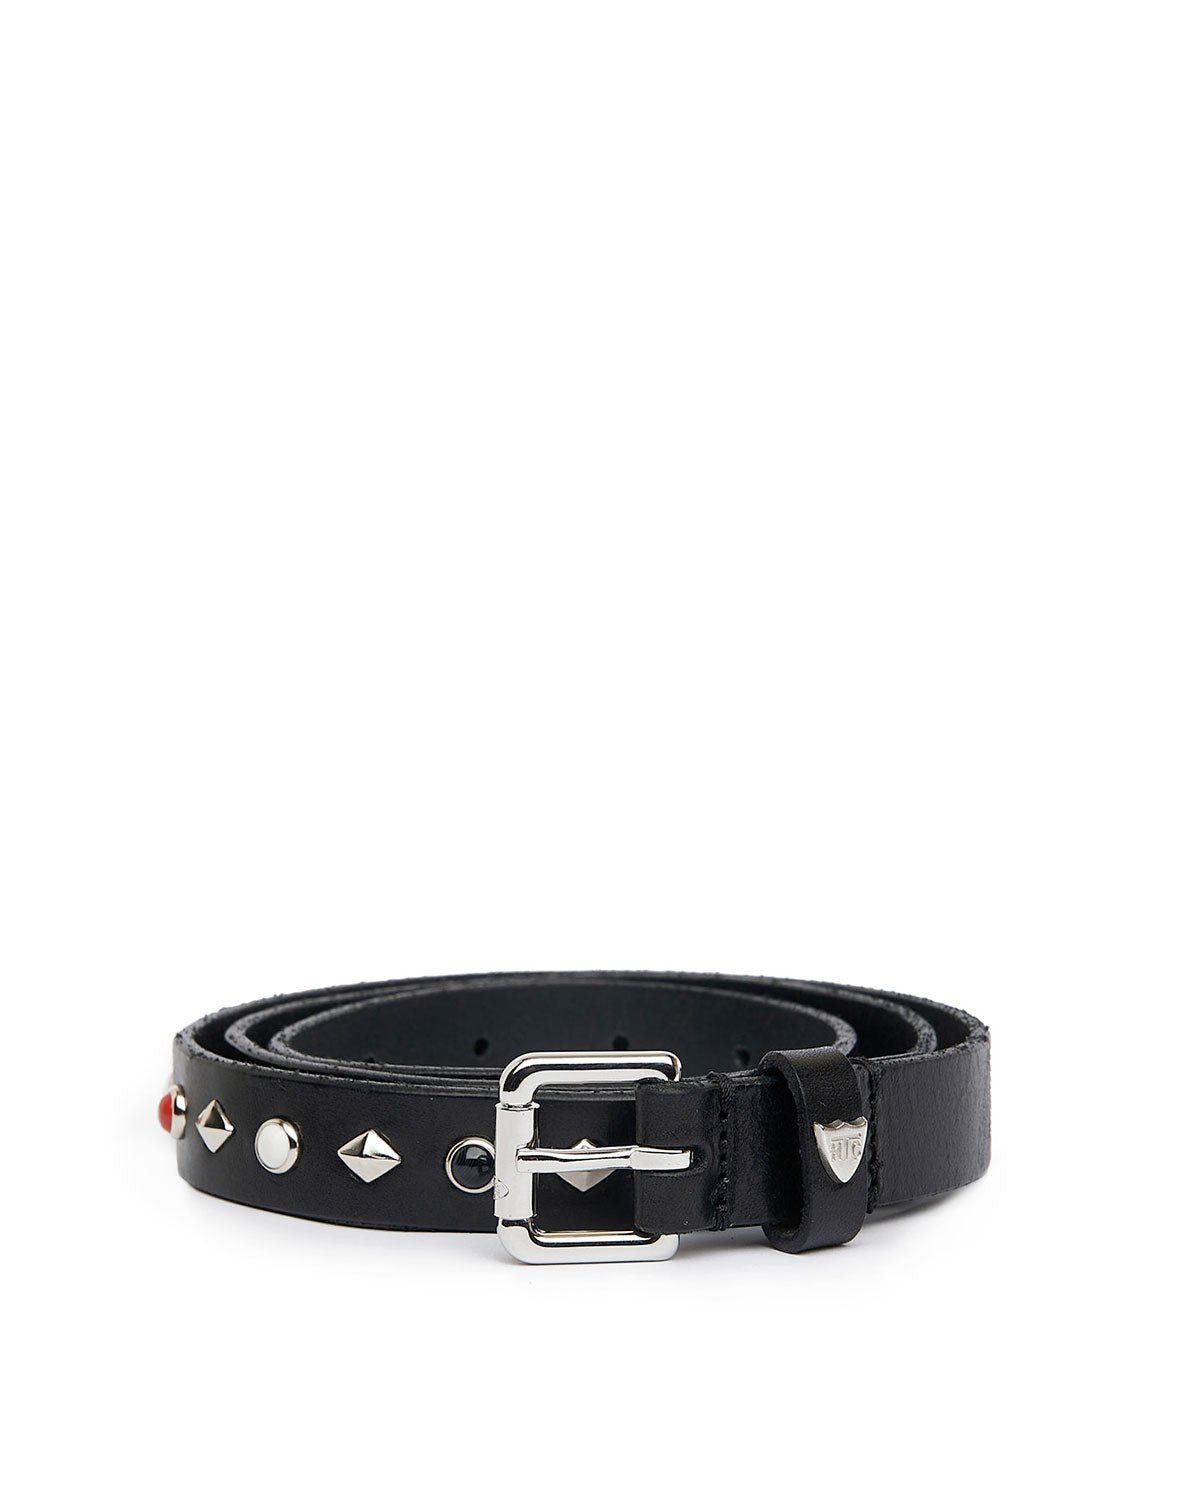 VENICE BELT Black leather belt, with rhombus studs and colored stones. Brass buckle. Height: 2,5 cm. HTC LOS ANGELES